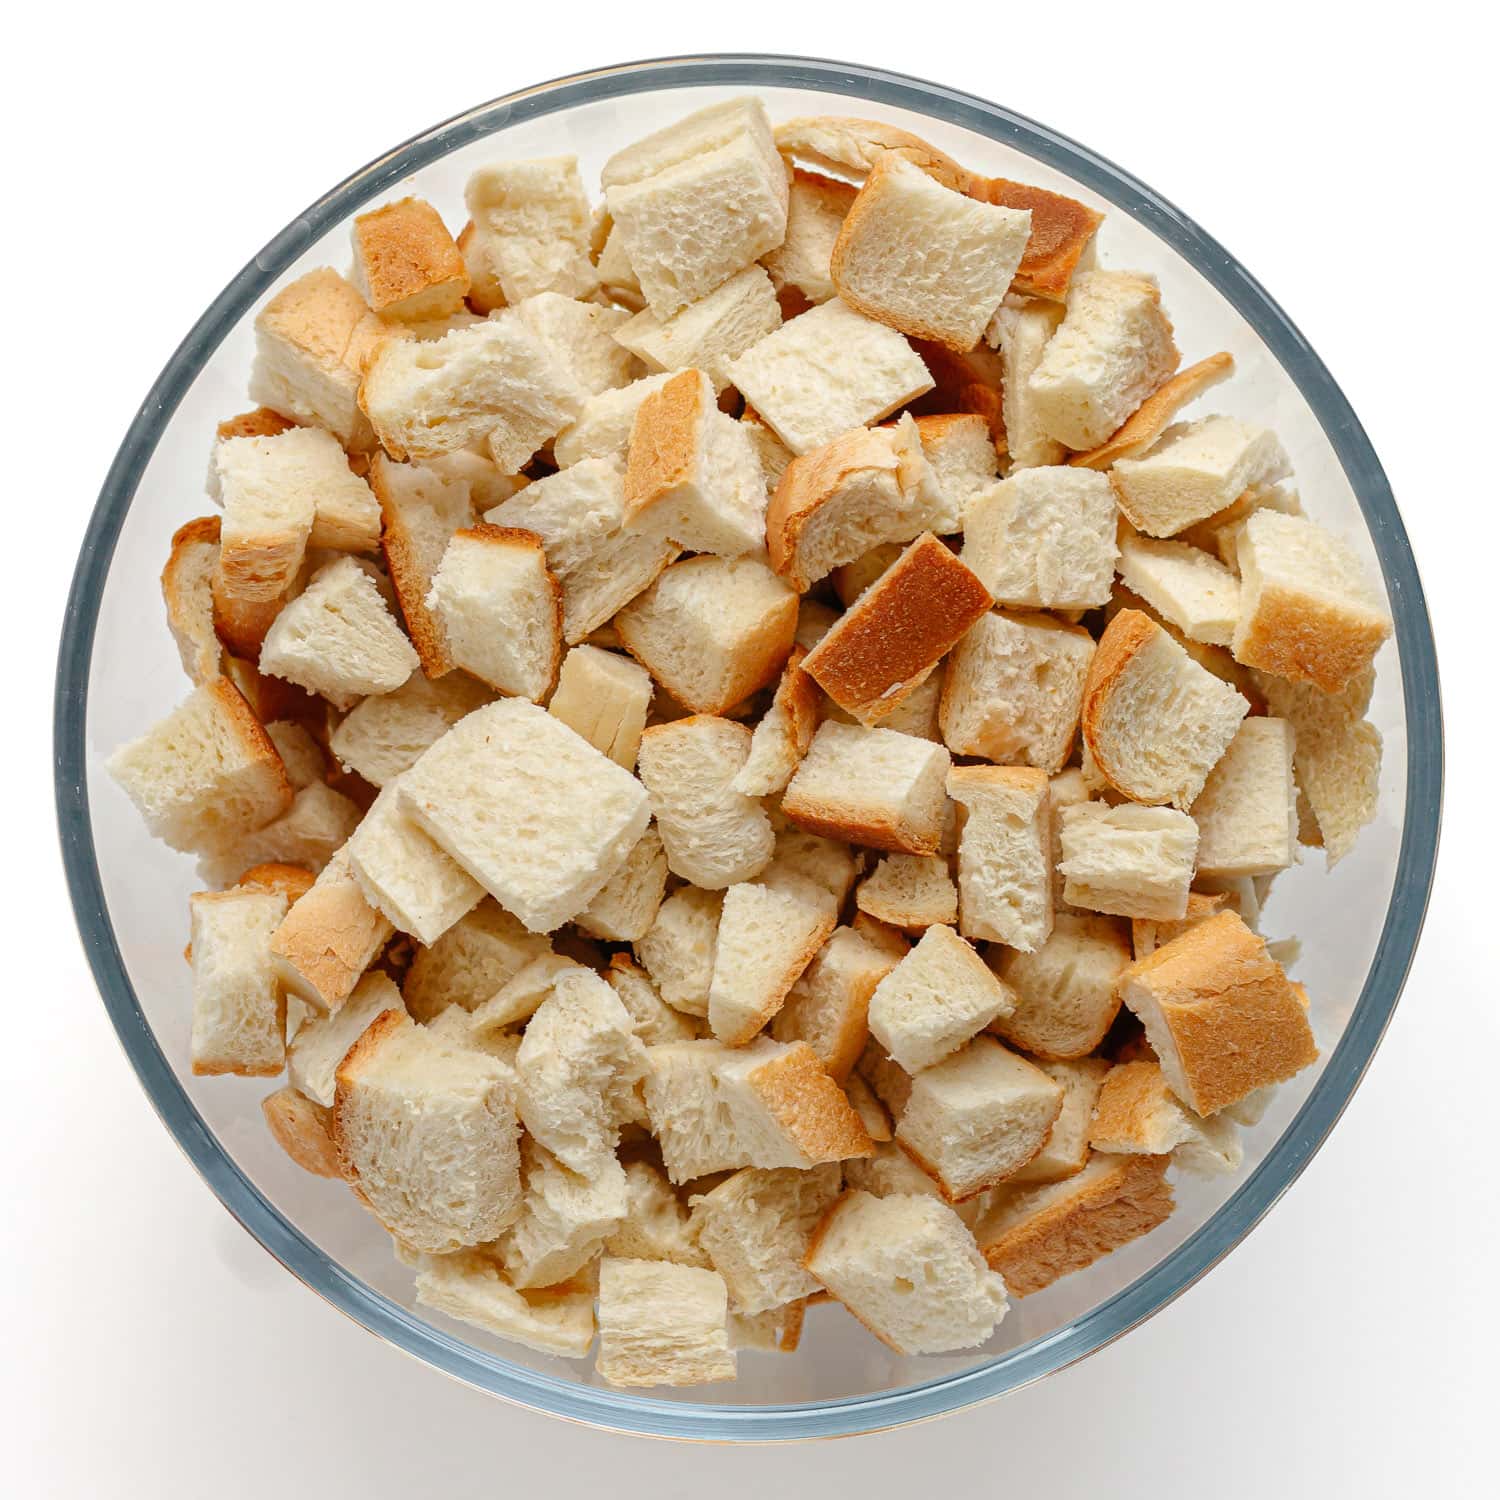 Cubed bread in a glass mixing bowl.